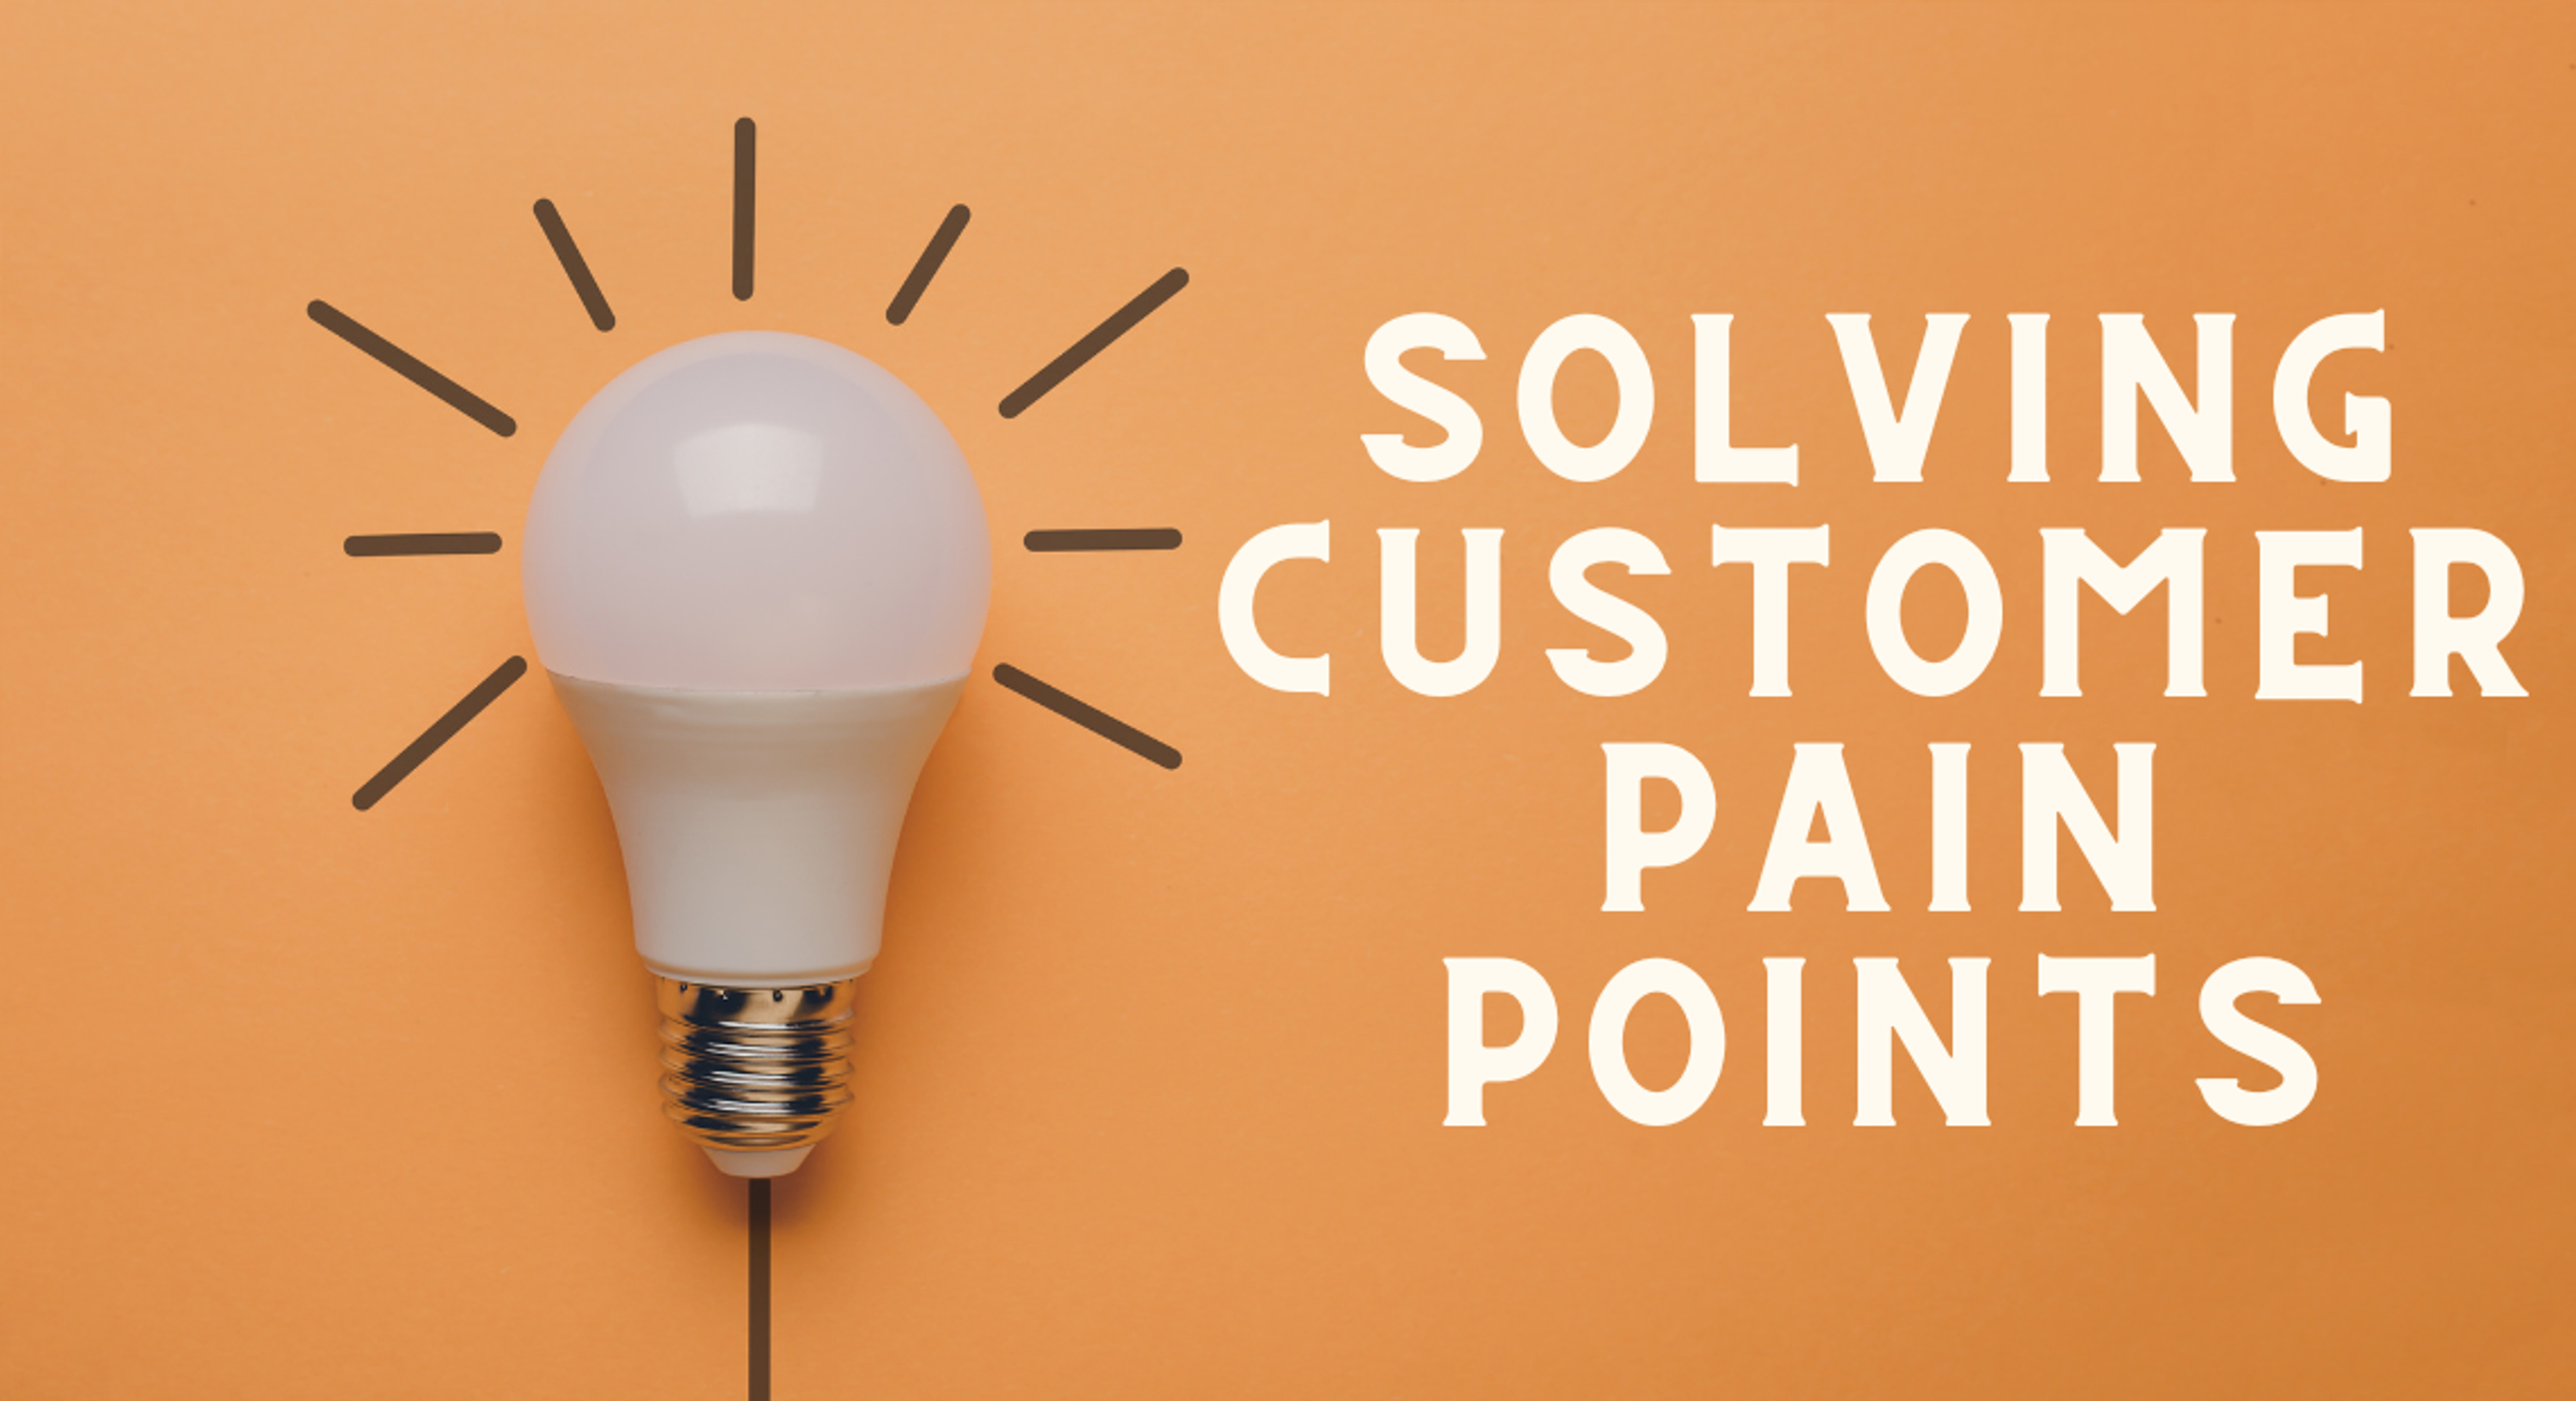 Customer Pain Points: How To Find, Discern, And Solve Issues